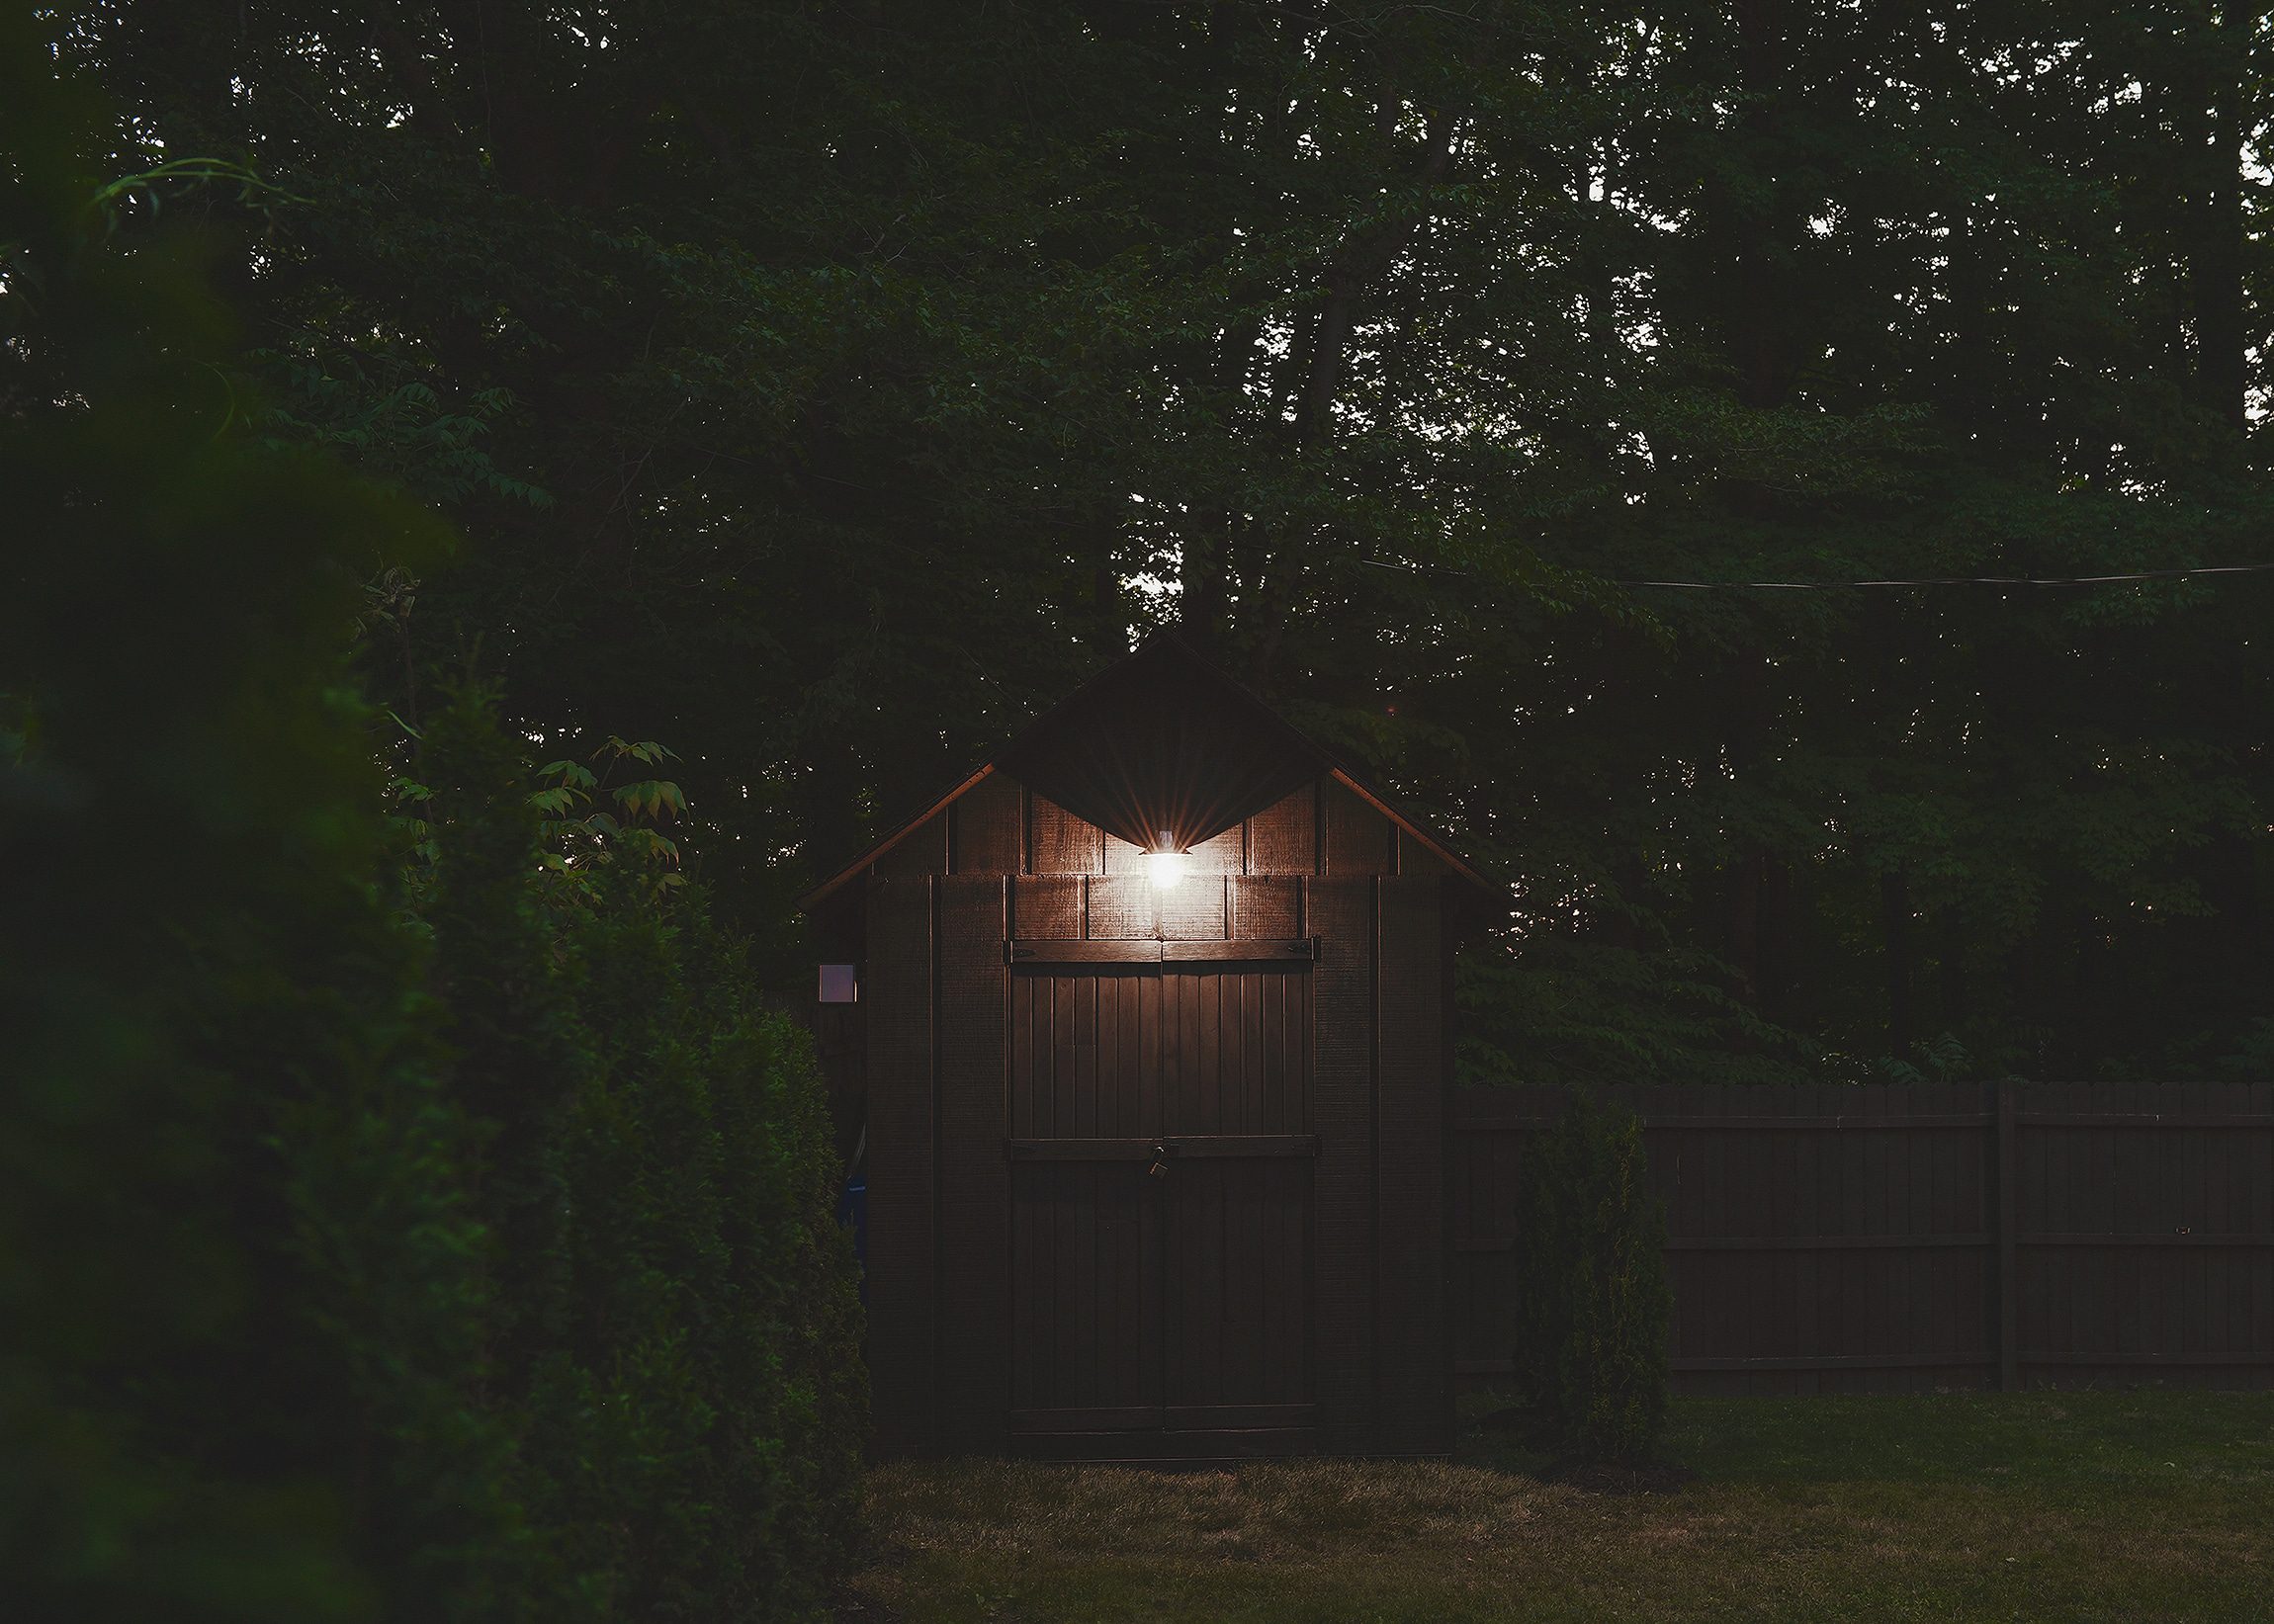 Our shed in the evening, giving off a warm glow from the solar light fixture | via Yellow Brick Home